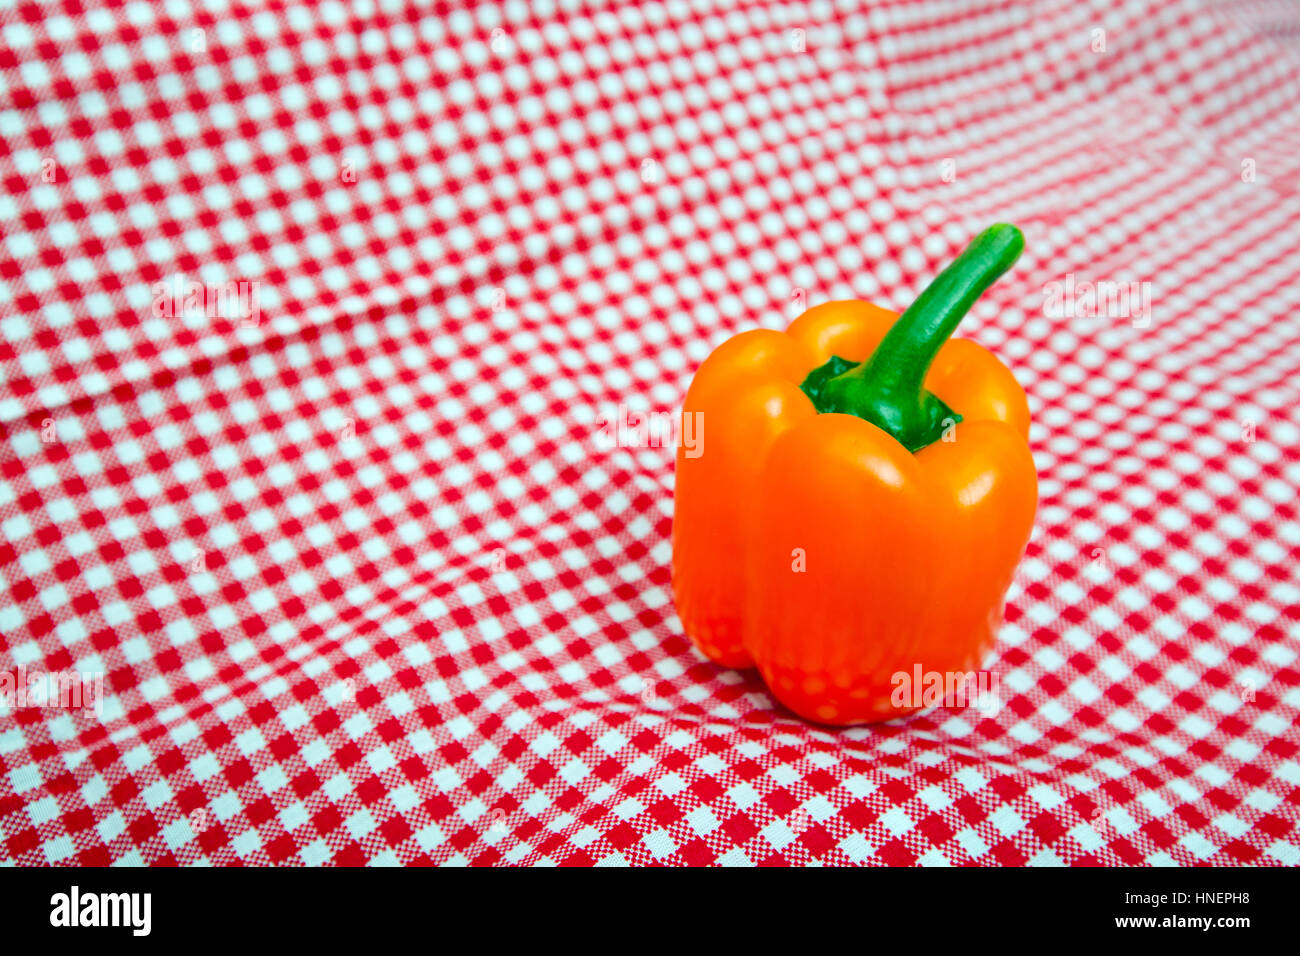 Orange Bell Pepper against red and white chequered cloth Stock Photo